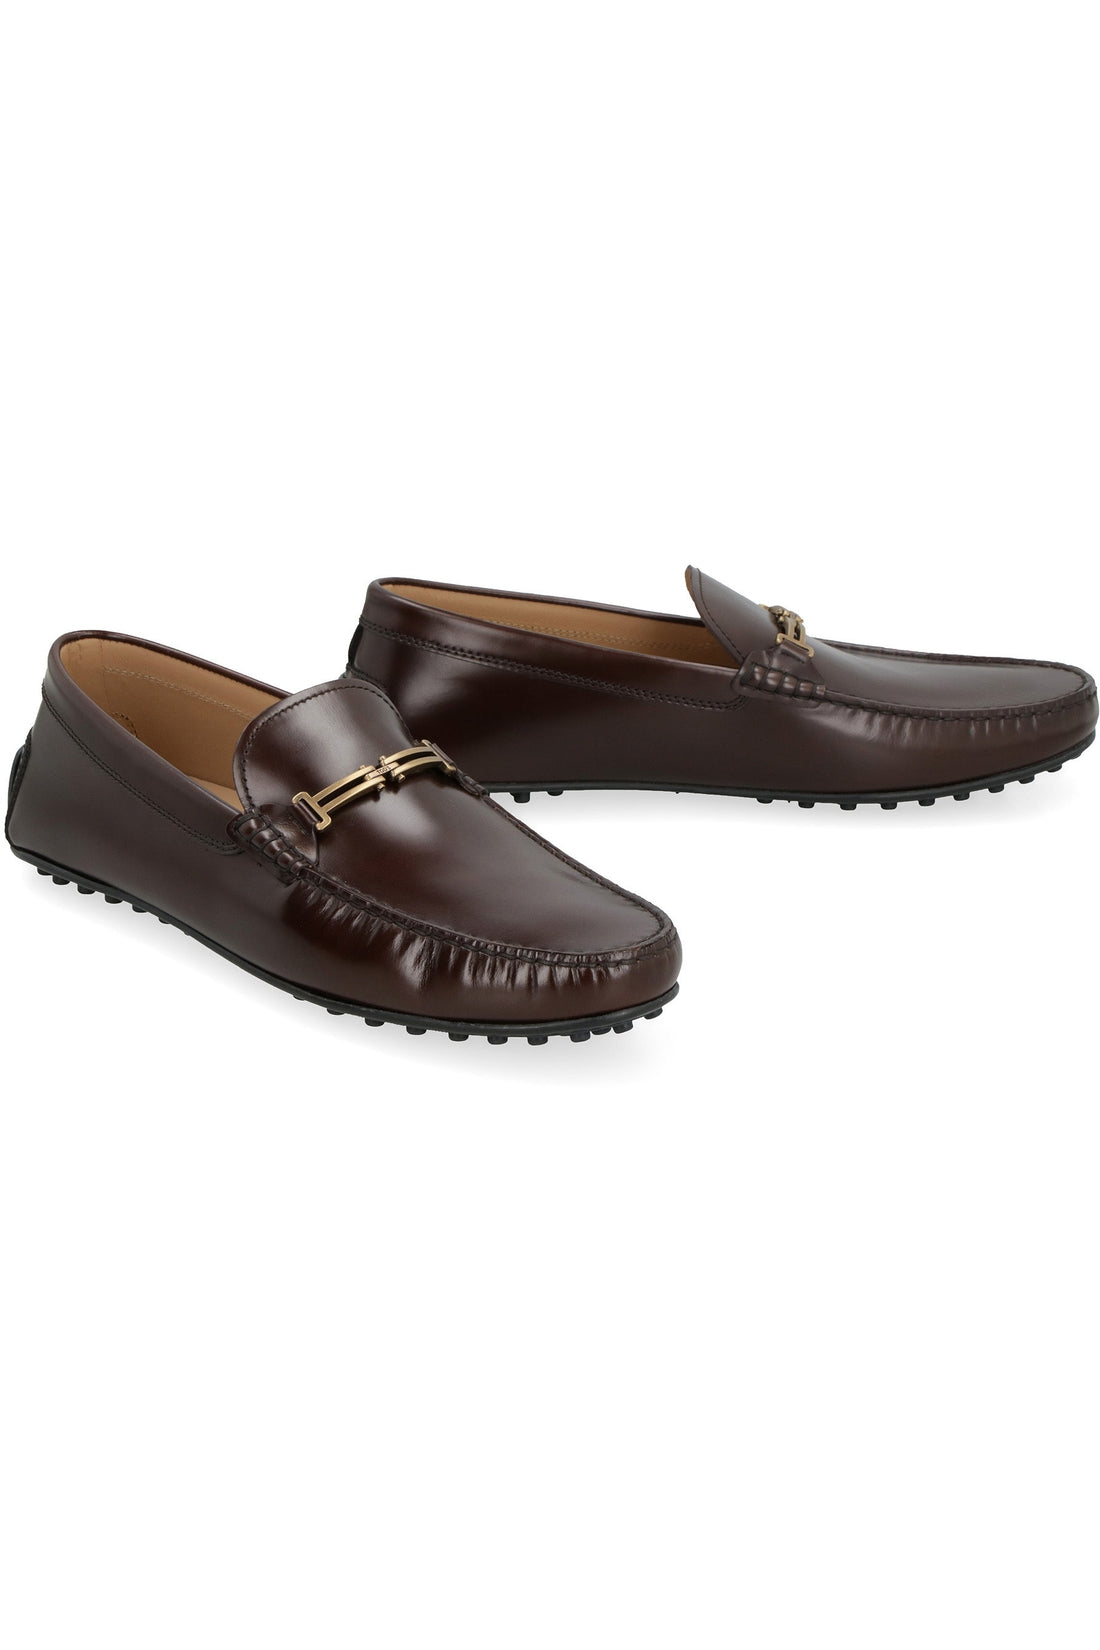 Tod's-OUTLET-SALE-Doap City leather loafers-ARCHIVIST